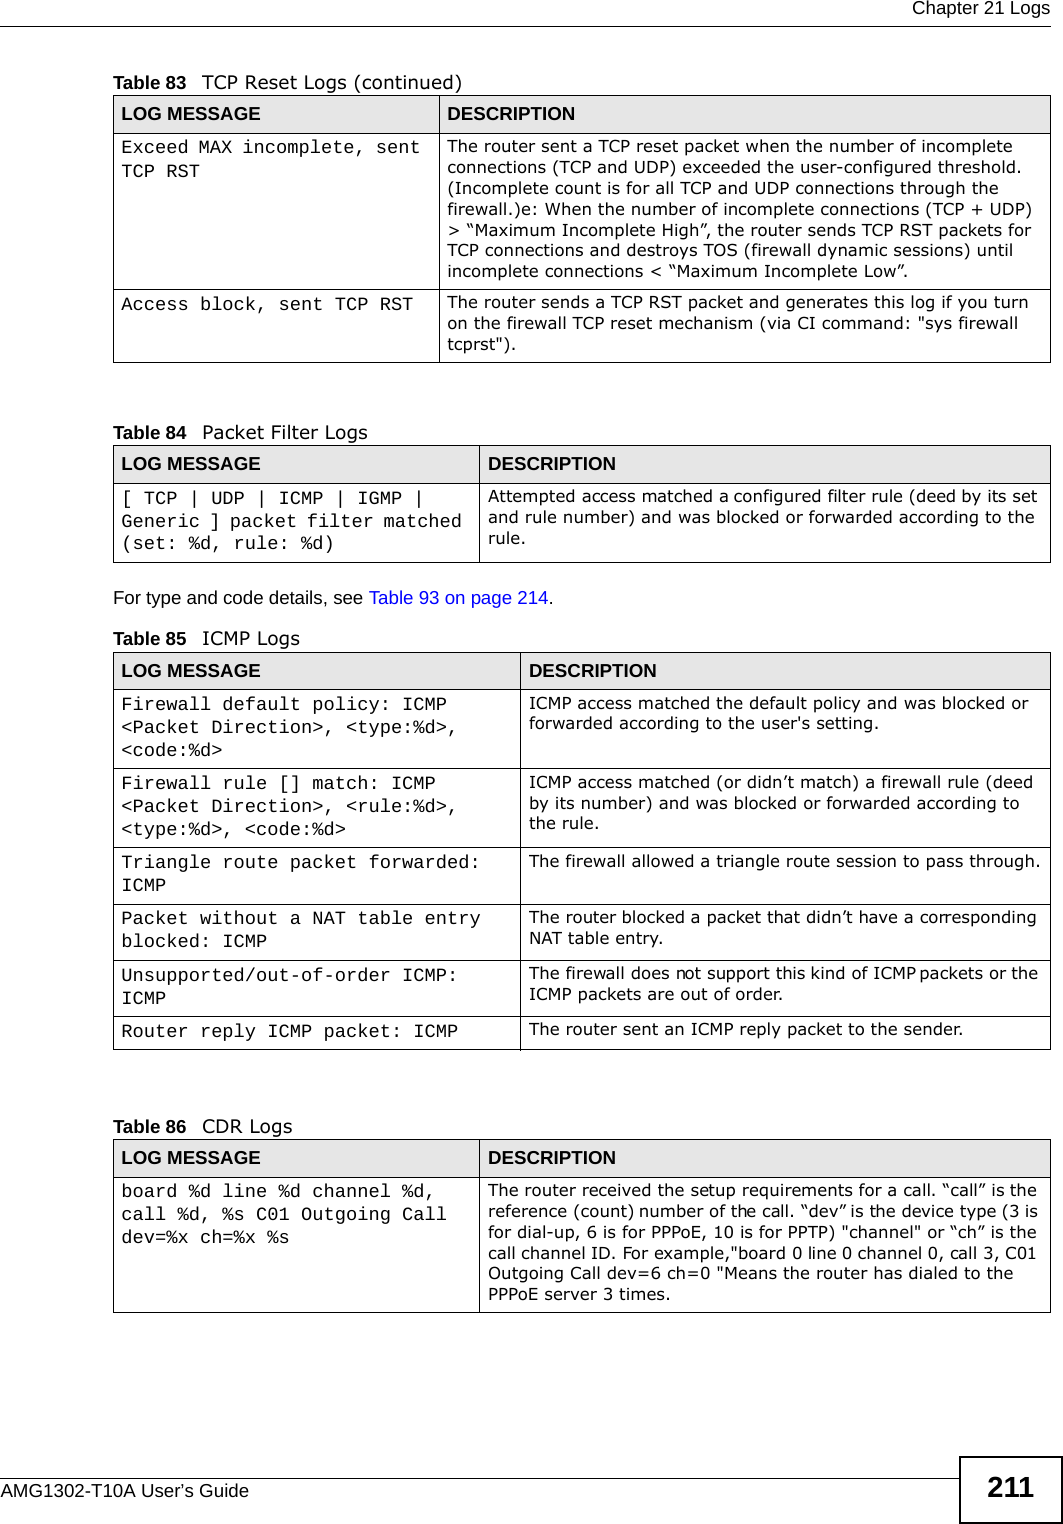  Chapter 21 LogsAMG1302-T10A User’s Guide 211 For type and code details, see Table 93 on page 214. Exceed MAX incomplete, sent TCP RSTThe router sent a TCP reset packet when the number of incomplete connections (TCP and UDP) exceeded the user-configured threshold. (Incomplete count is for all TCP and UDP connections through the firewall.)e: When the number of incomplete connections (TCP + UDP) &gt; “Maximum Incomplete High”, the router sends TCP RST packets for TCP connections and destroys TOS (firewall dynamic sessions) until incomplete connections &lt; “Maximum Incomplete Low”.Access block, sent TCP RST The router sends a TCP RST packet and generates this log if you turn on the firewall TCP reset mechanism (via CI command: &quot;sys firewall tcprst&quot;).Table 84   Packet Filter LogsLOG MESSAGE DESCRIPTION[ TCP | UDP | ICMP | IGMP | Generic ] packet filter matched (set: %d, rule: %d)Attempted access matched a configured filter rule (deed by its set and rule number) and was blocked or forwarded according to the rule.Table 85   ICMP LogsLOG MESSAGE DESCRIPTIONFirewall default policy: ICMP &lt;Packet Direction&gt;, &lt;type:%d&gt;, &lt;code:%d&gt;ICMP access matched the default policy and was blocked or forwarded according to the user&apos;s setting.Firewall rule [] match: ICMP &lt;Packet Direction&gt;, &lt;rule:%d&gt;, &lt;type:%d&gt;, &lt;code:%d&gt;ICMP access matched (or didn’t match) a firewall rule (deed by its number) and was blocked or forwarded according to the rule. Triangle route packet forwarded: ICMPThe firewall allowed a triangle route session to pass through.Packet without a NAT table entry blocked: ICMPThe router blocked a packet that didn’t have a corresponding NAT table entry.Unsupported/out-of-order ICMP: ICMPThe firewall does not support this kind of ICMP packets or the ICMP packets are out of order.Router reply ICMP packet: ICMP The router sent an ICMP reply packet to the sender.Table 86   CDR LogsLOG MESSAGE DESCRIPTIONboard %d line %d channel %d, call %d, %s C01 Outgoing Call dev=%x ch=%x %sThe router received the setup requirements for a call. “call” is the reference (count) number of the call. “dev” is the device type (3 is for dial-up, 6 is for PPPoE, 10 is for PPTP) &quot;channel&quot; or “ch” is the call channel ID. For example,&quot;board 0 line 0 channel 0, call 3, C01 Outgoing Call dev=6 ch=0 &quot;Means the router has dialed to the PPPoE server 3 times.Table 83   TCP Reset Logs (continued)LOG MESSAGE DESCRIPTION